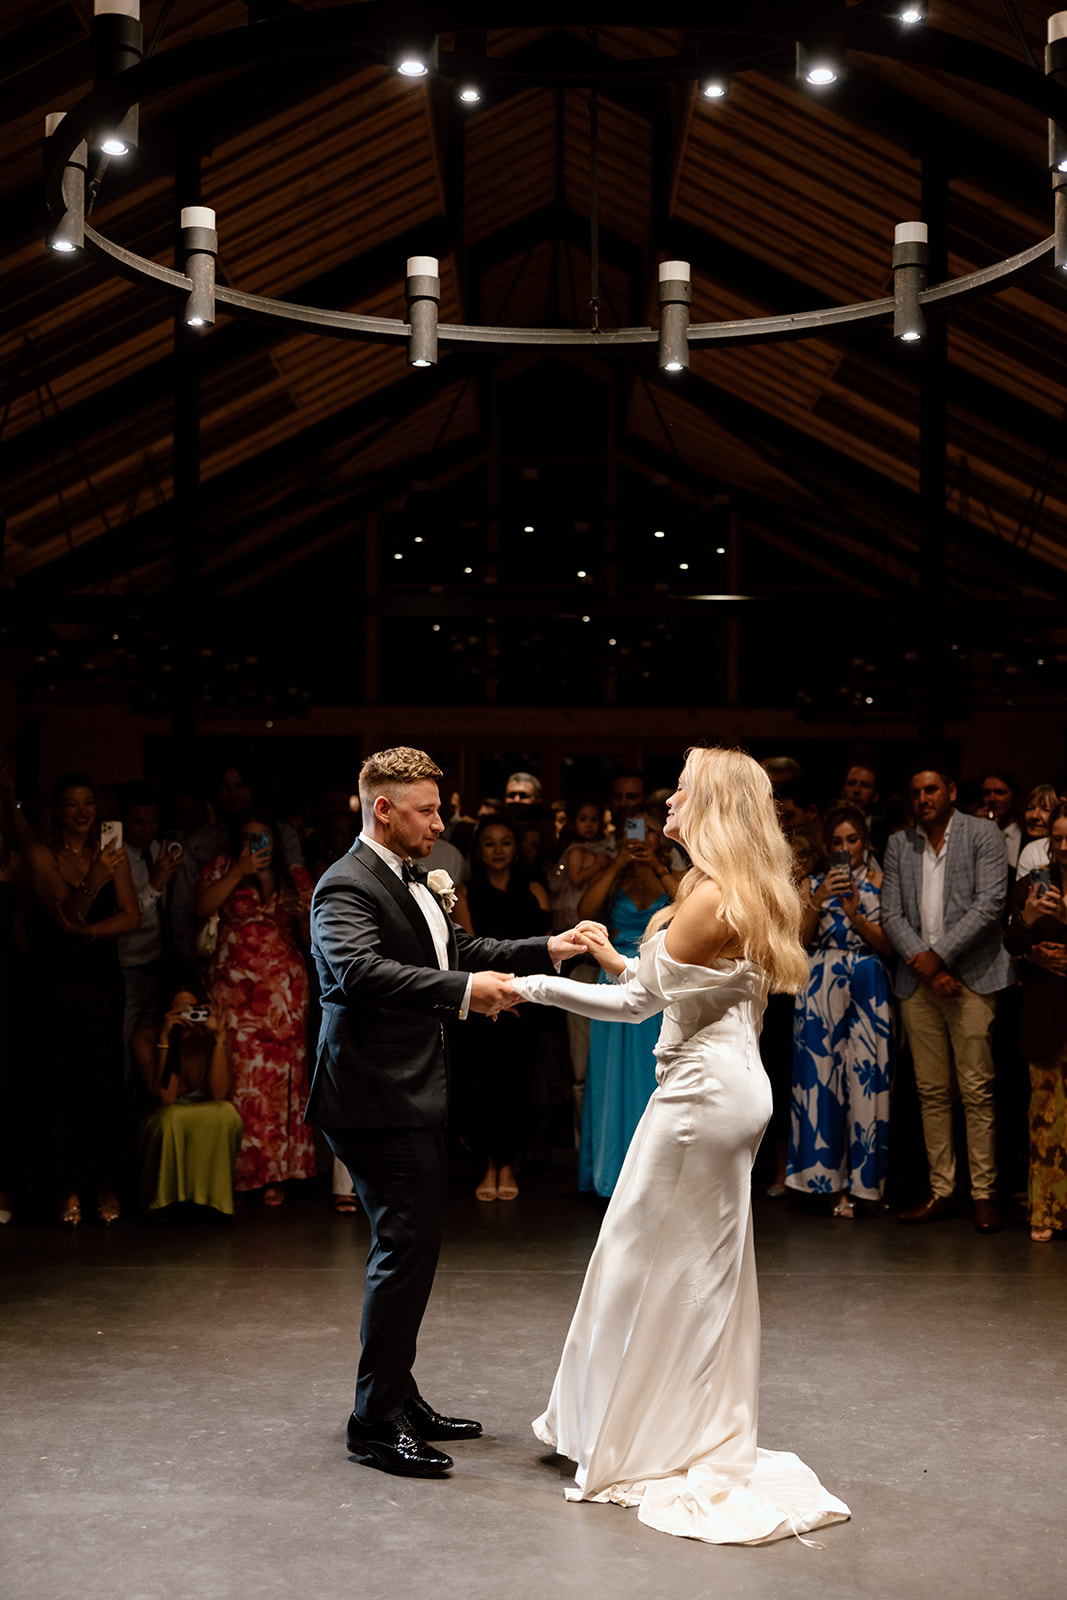 Bride and groom first dance at their wedding reception in the Southern Highlands Bendooley Estate